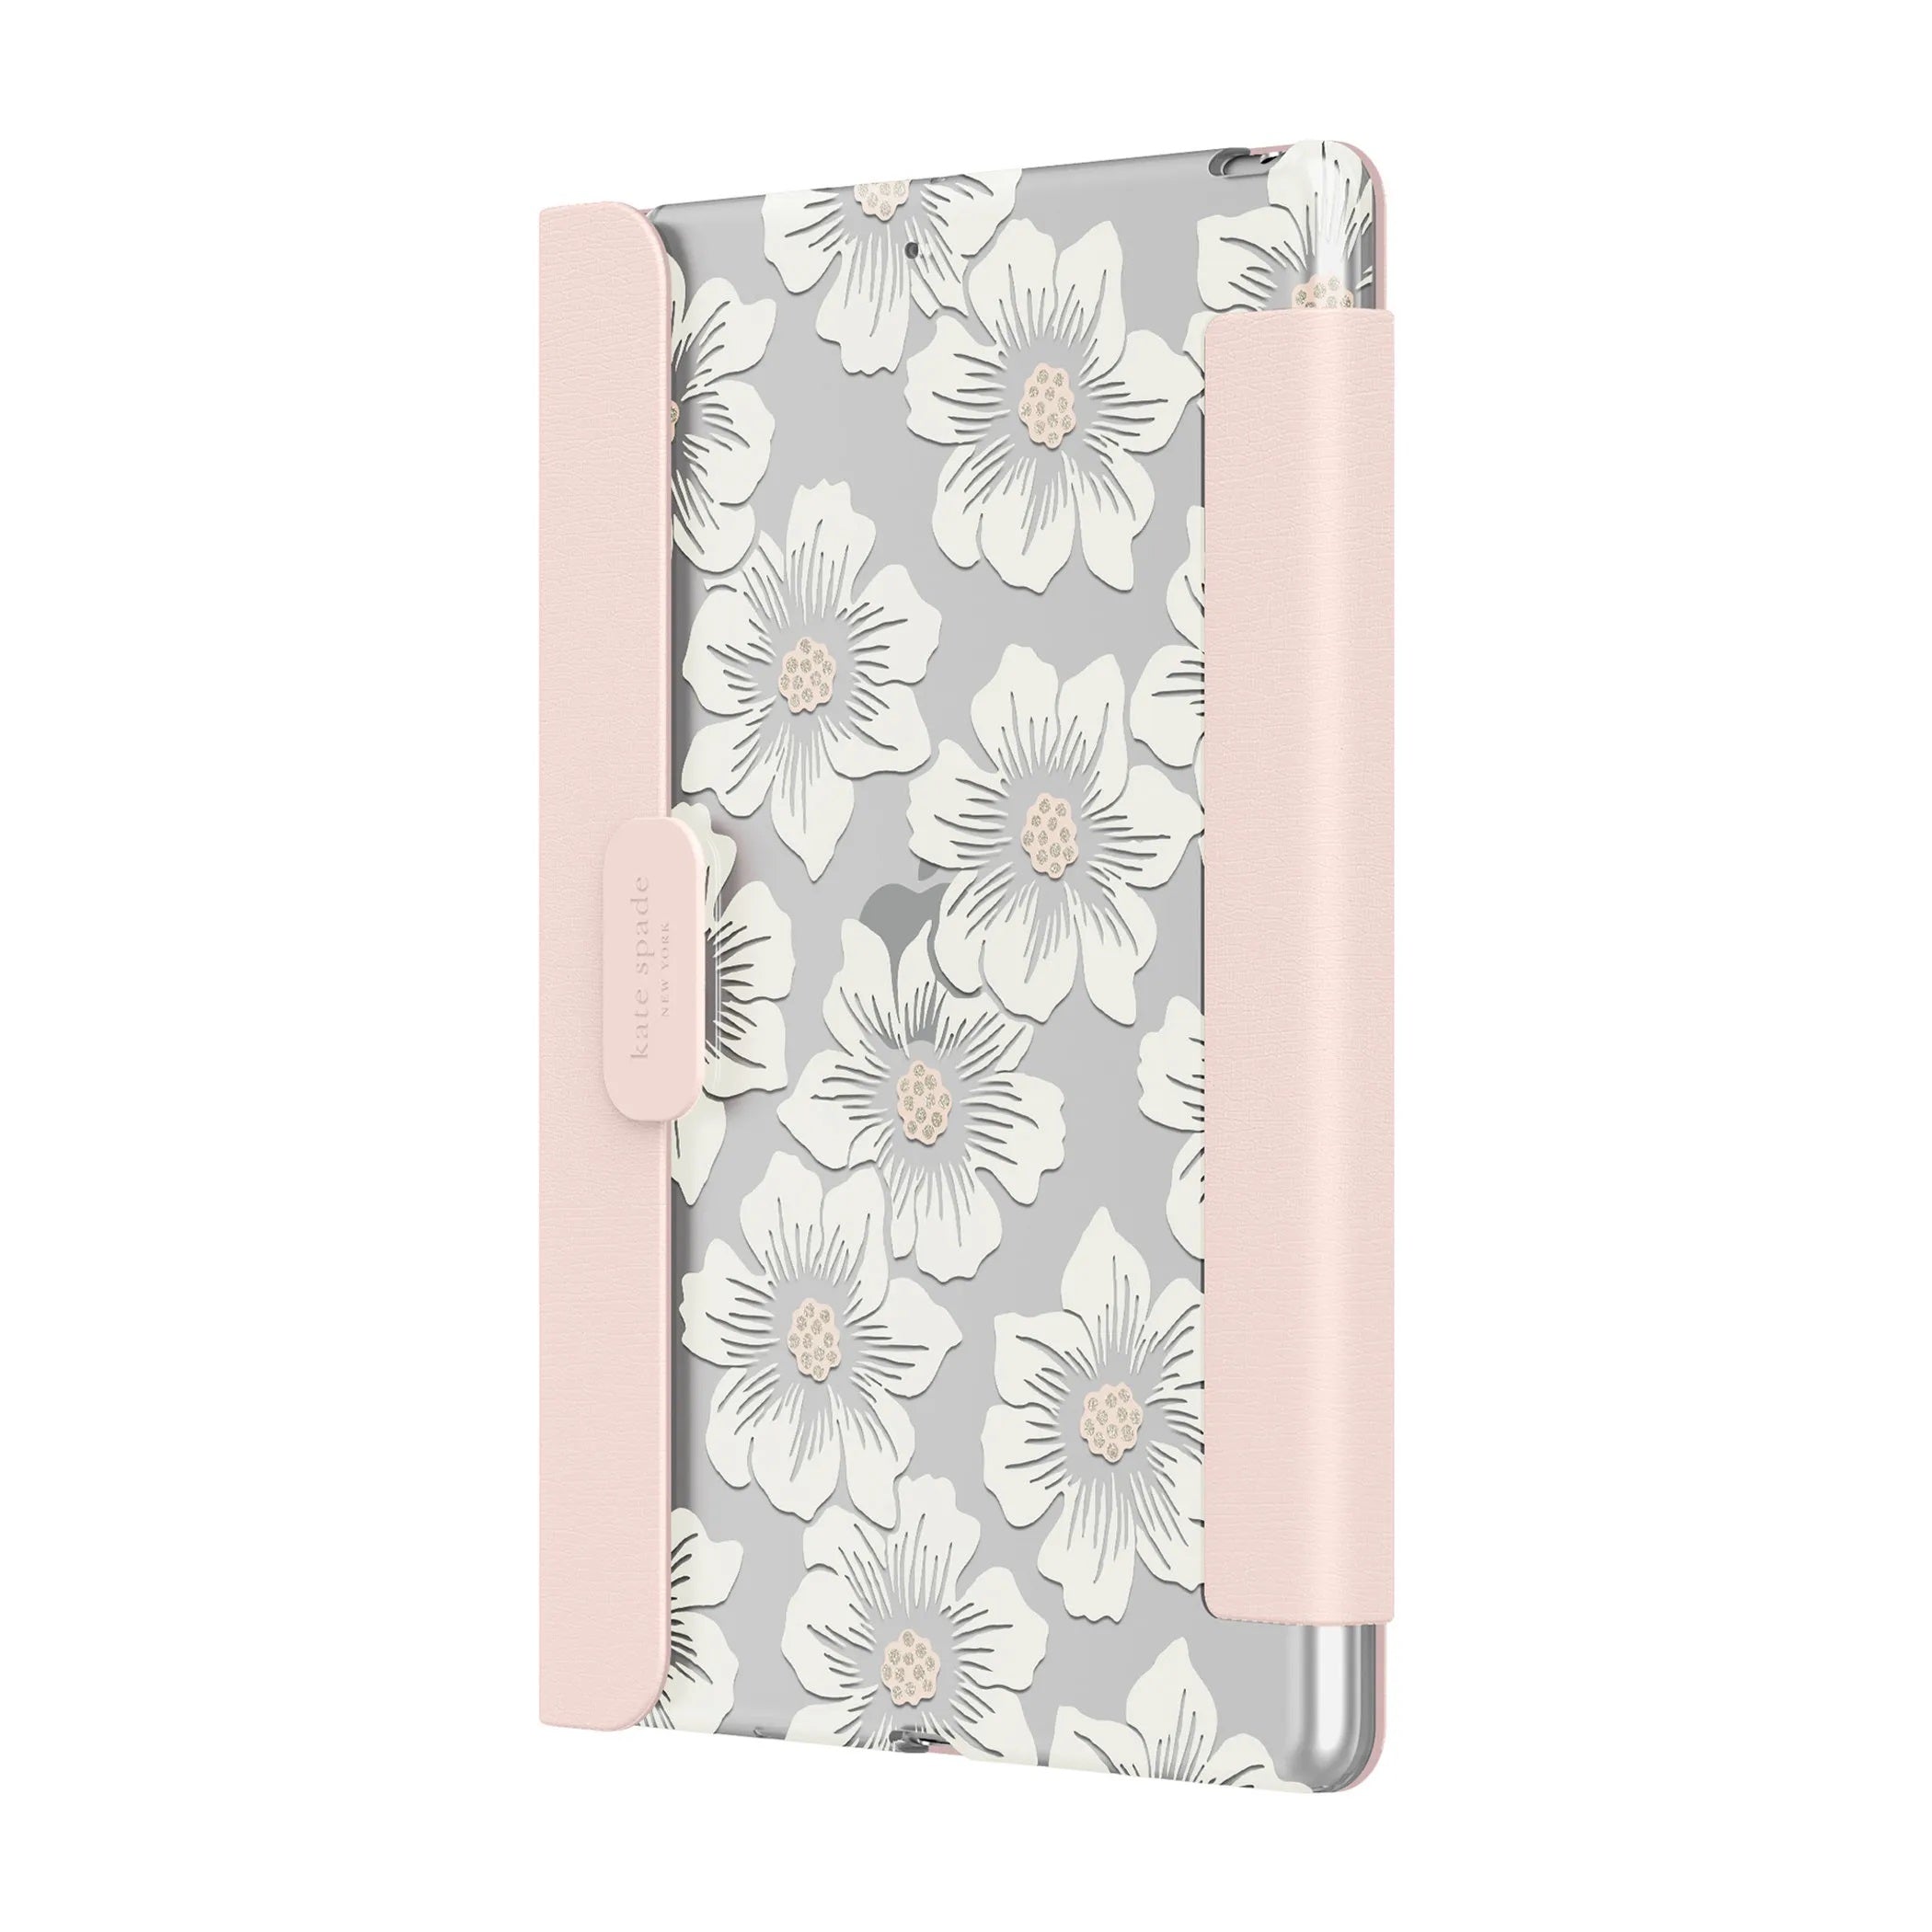 Kate Spade New York Protective Folio Case for iPad Mini 6th Gen(Hollyhock Floral)